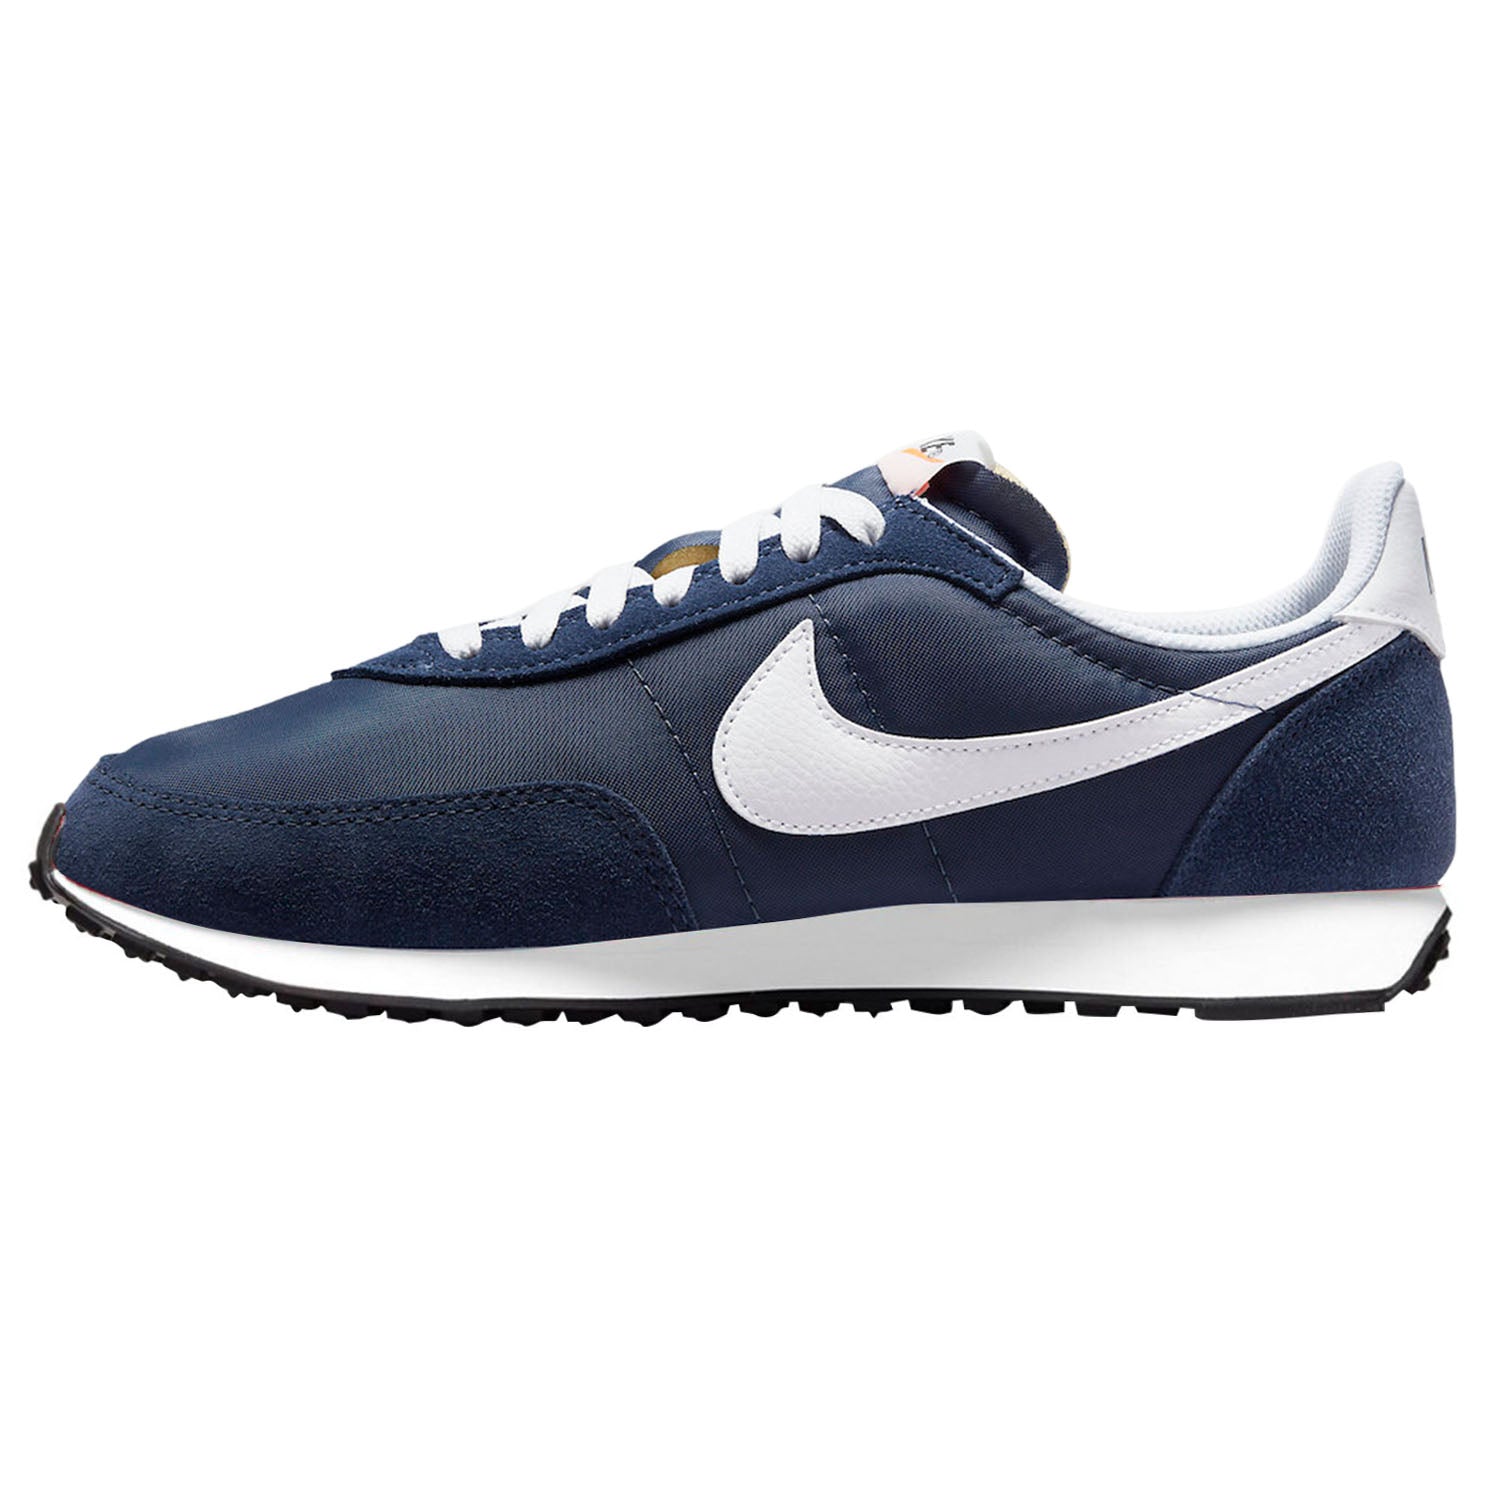 Nike Waffle Trainer 2 Mens Style : Dh1349-401